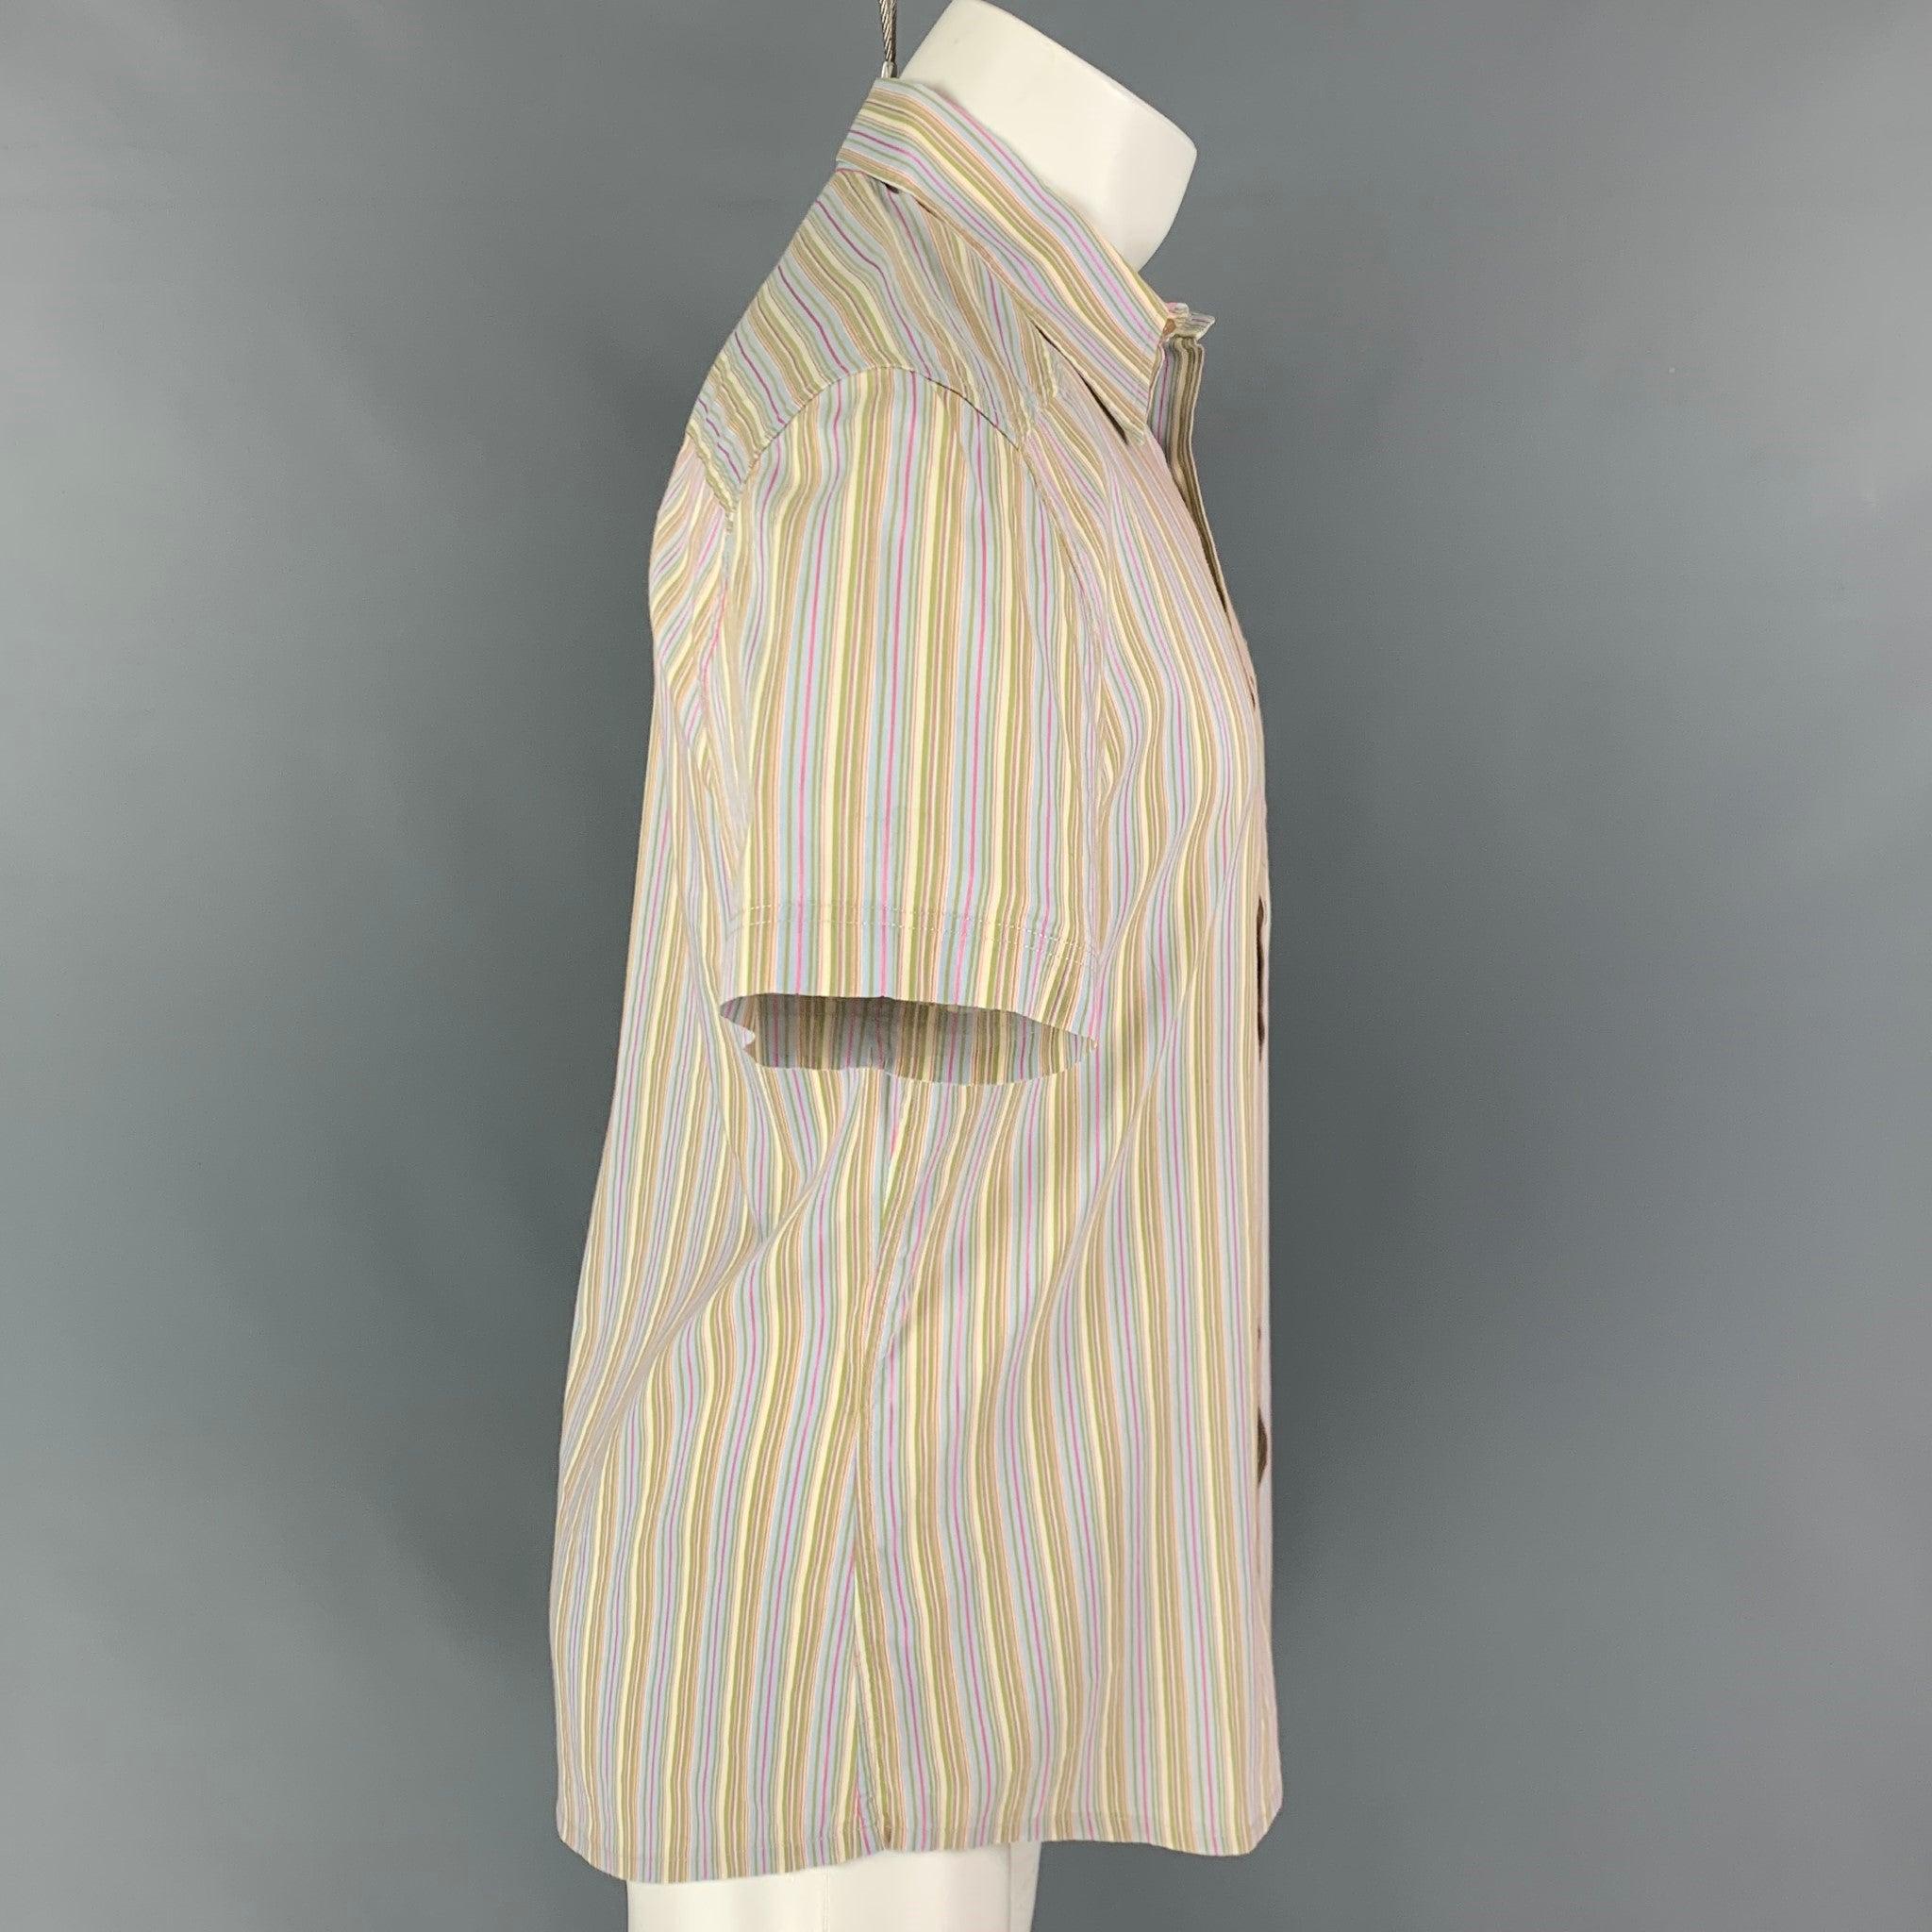 VERSACE JEANS COUTURE short sleeve shirt comes in a multi-color stripe cotton featuring a spread collar, patch details, ack graphic design, and a button up closure. Made in Italy.
Very Good
Pre-Owned Condition. 

Marked:   M  

Measurements: 
